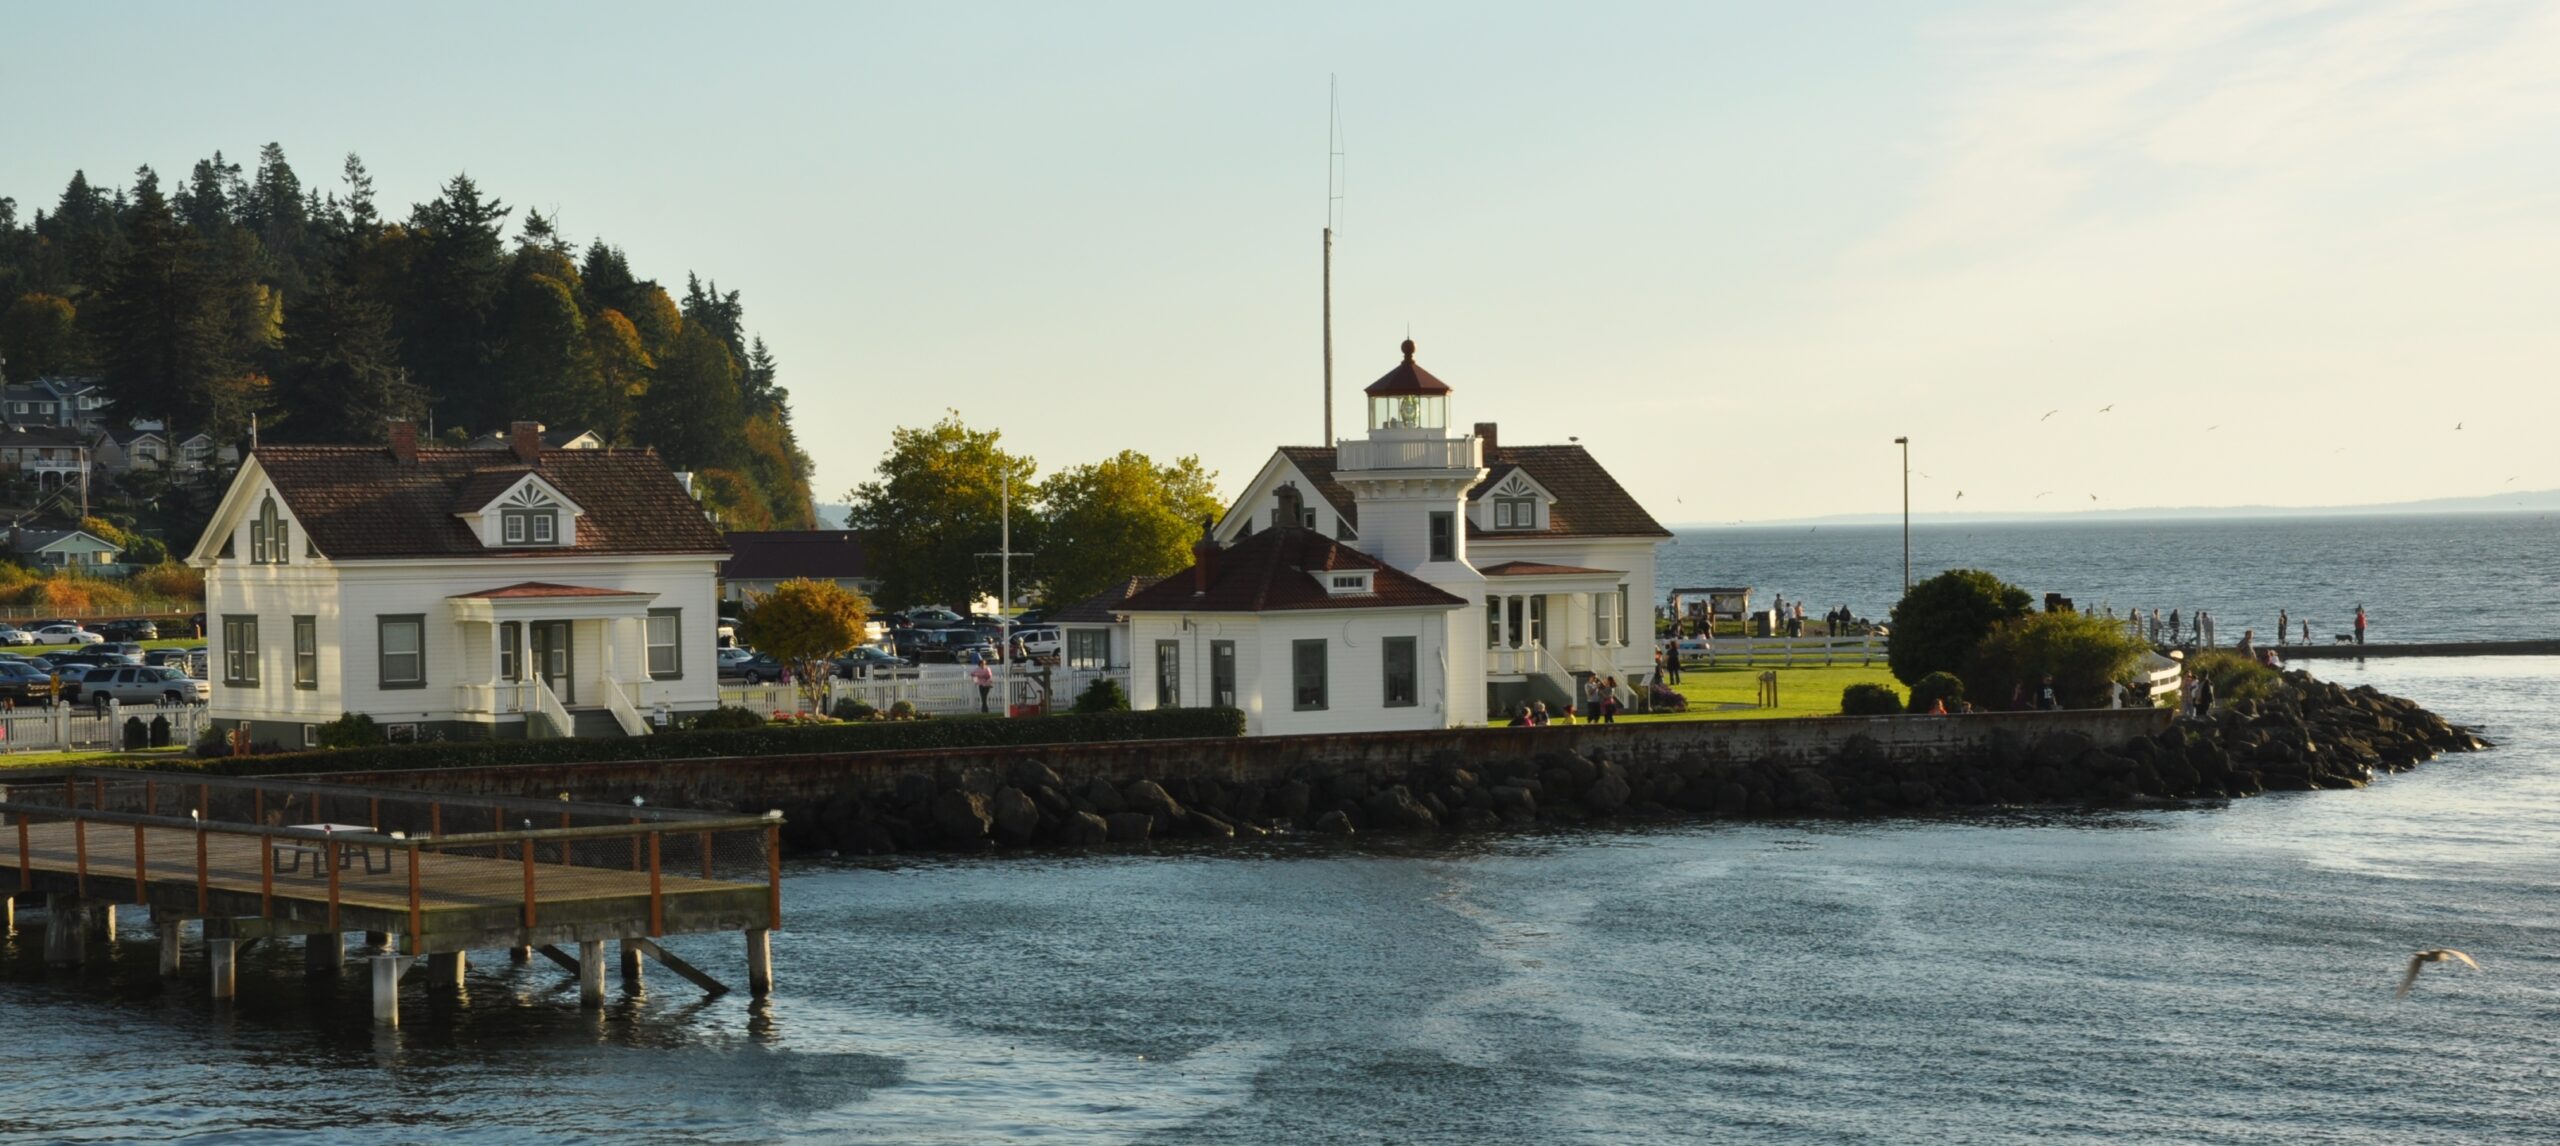 view of lighthouse and buildings on water